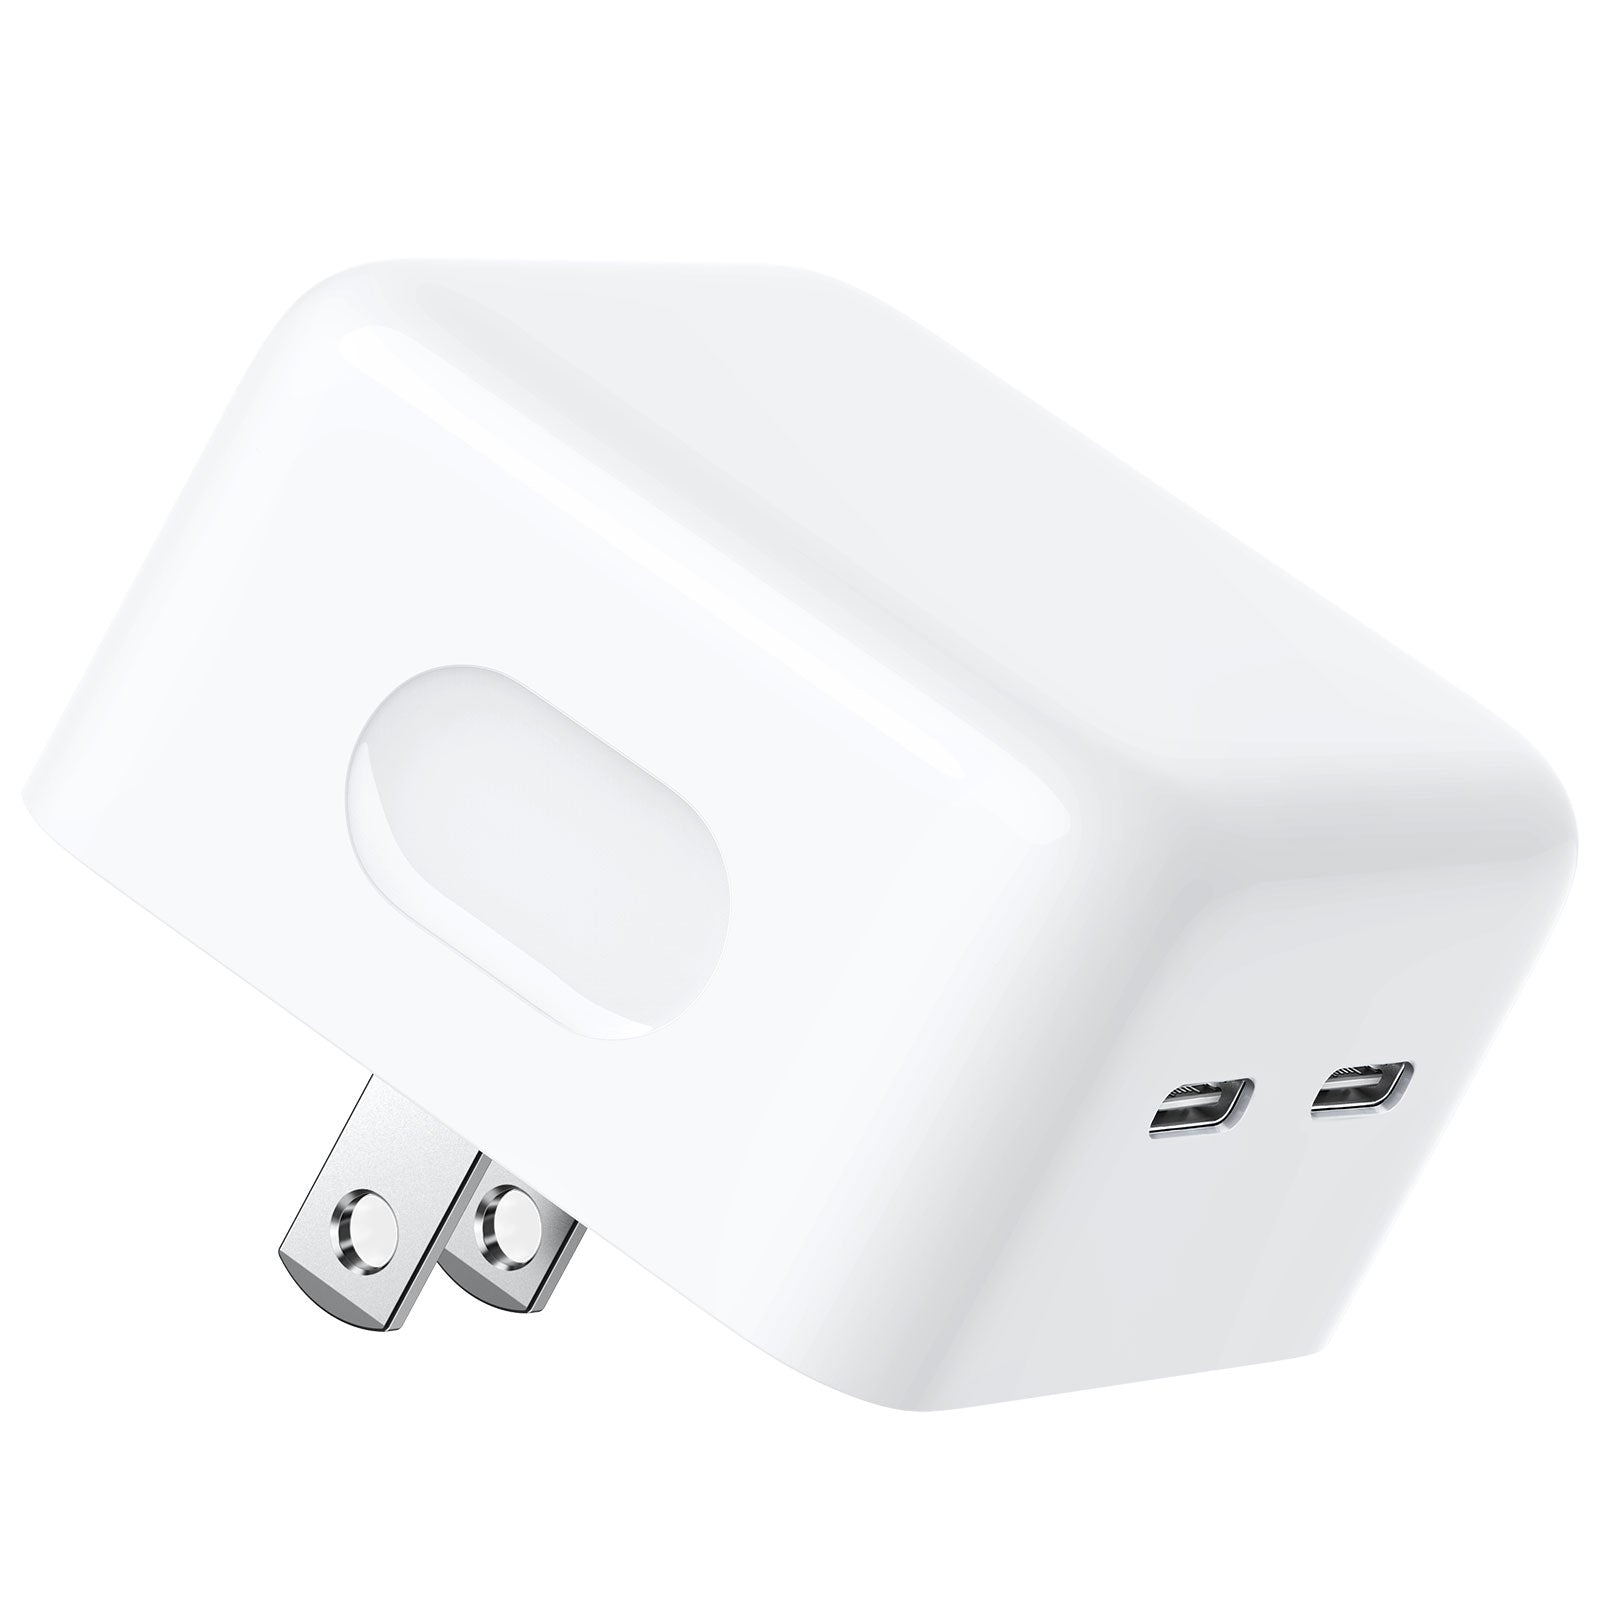 Apple iPhone 12 Charger (USB-C Adapter and Cable) Price in India